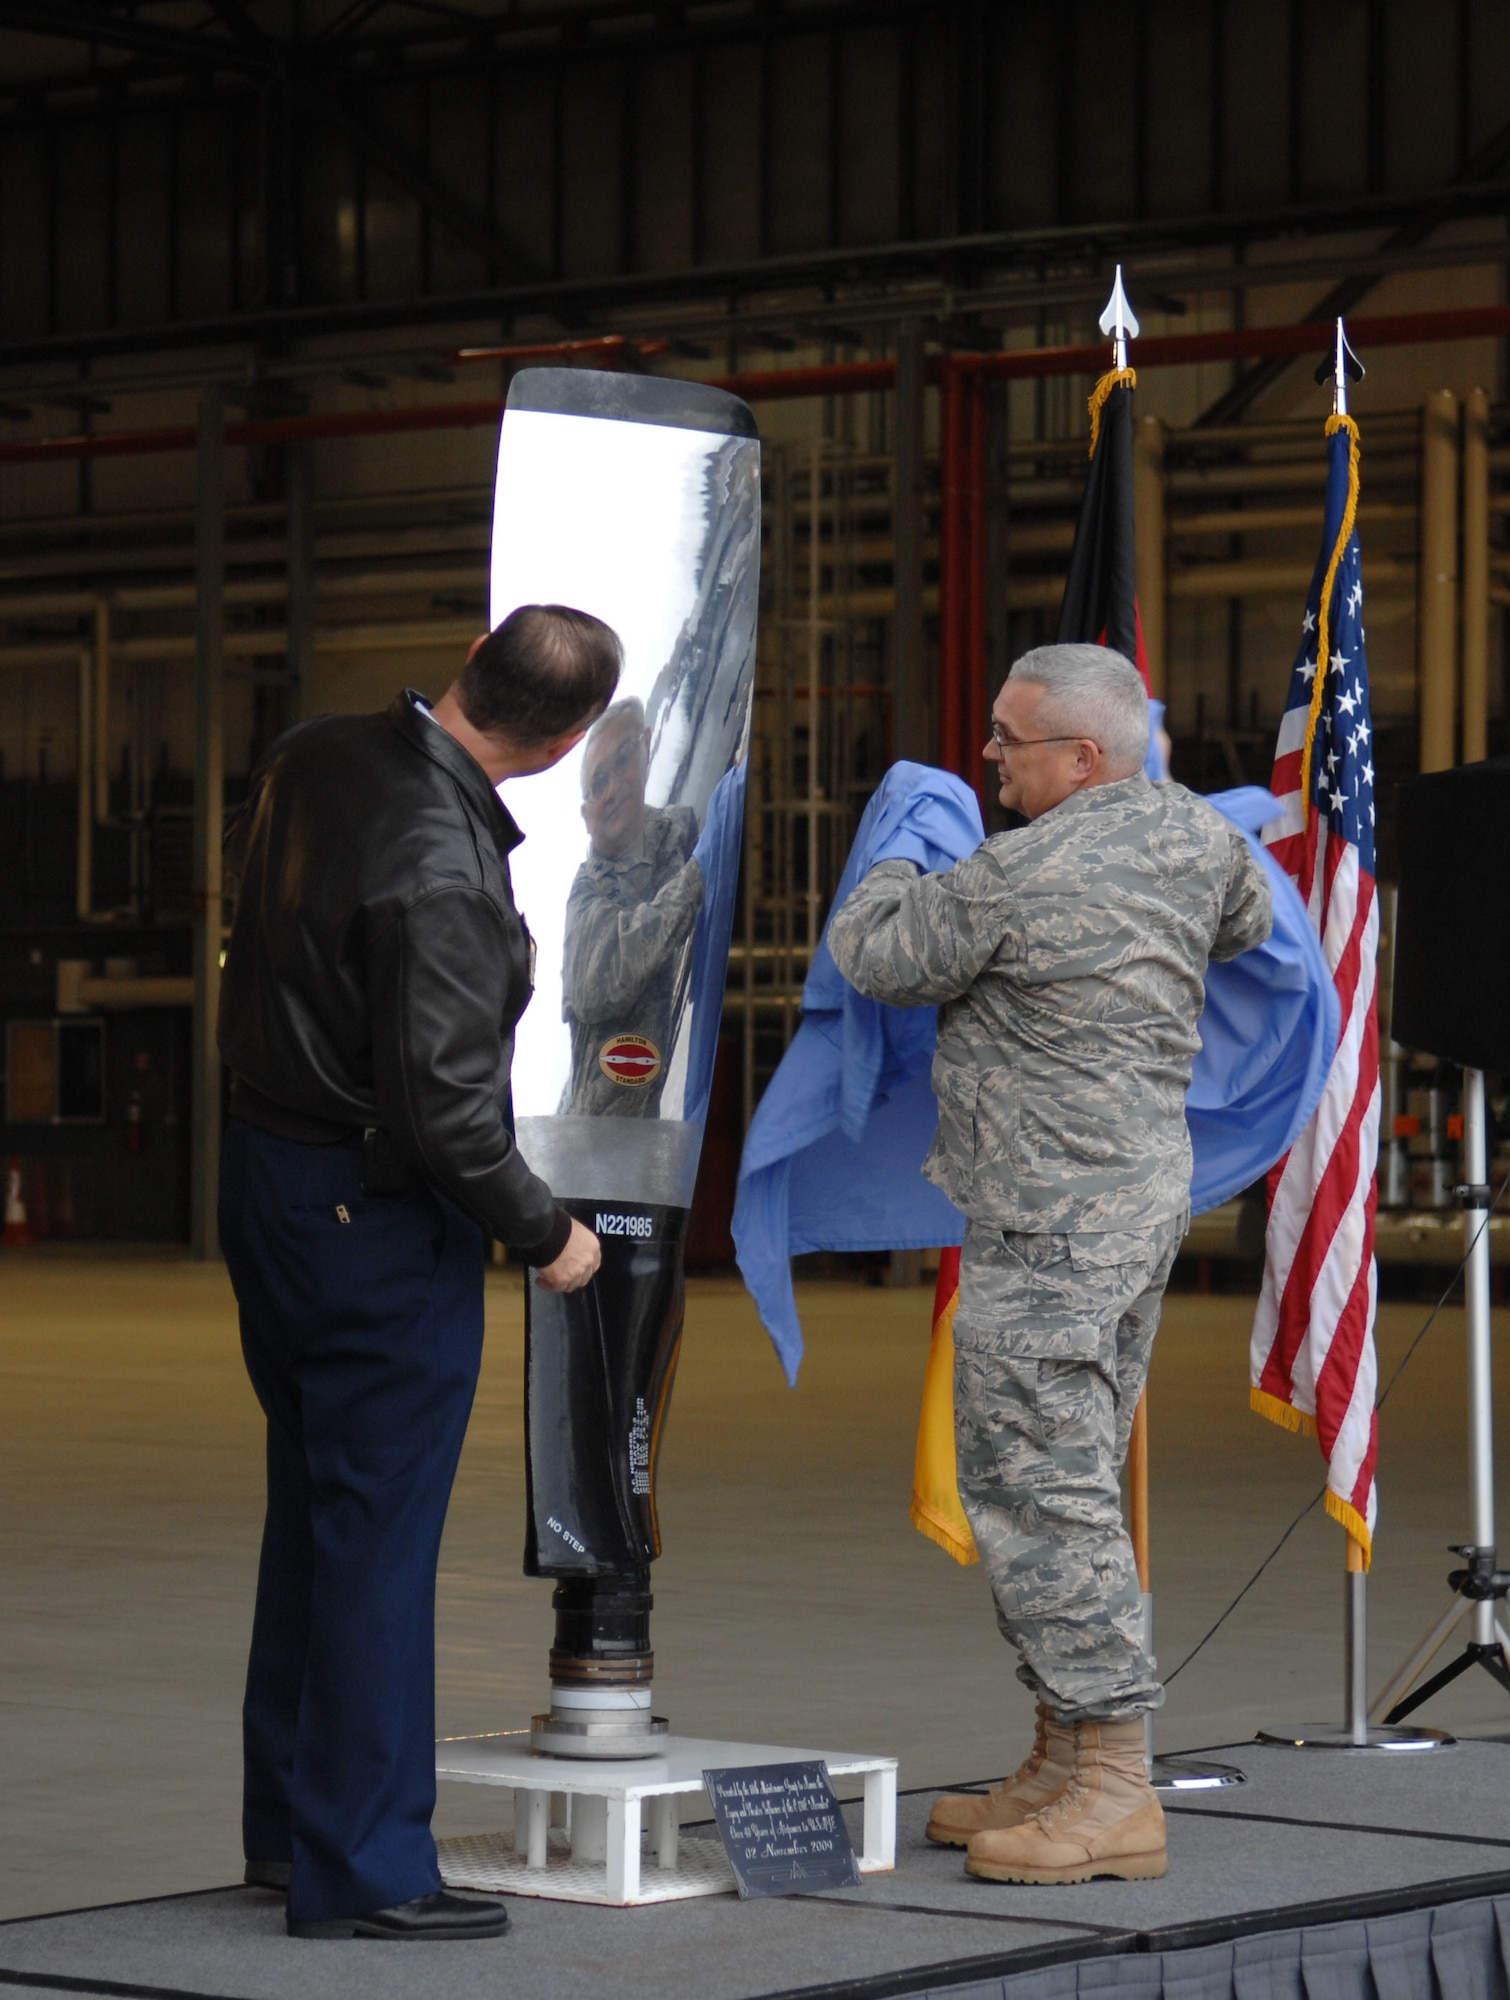 U.S. Air Force Lt. Col. Timothy Moore(right), 86th Maintenance Squadron deputy commander, presents Col. Douglas Sevier, 86th Airlift Wing vice commander, with a legacy presentation on behalf of the 86th Maintenance Squadron during a final departure ceremony on Ramstein Air Base, Germany, Nov. 2, 2009. The C-130E Hercules has provided more than 40 years of airpower to U.S.  Air Forces in Europe, and is being replaced with the new C-130J Super Hercules as part of the revitalization of the Air Force fleet. (U.S. Air Force photo by Airman 1st Class Brittany Perry)